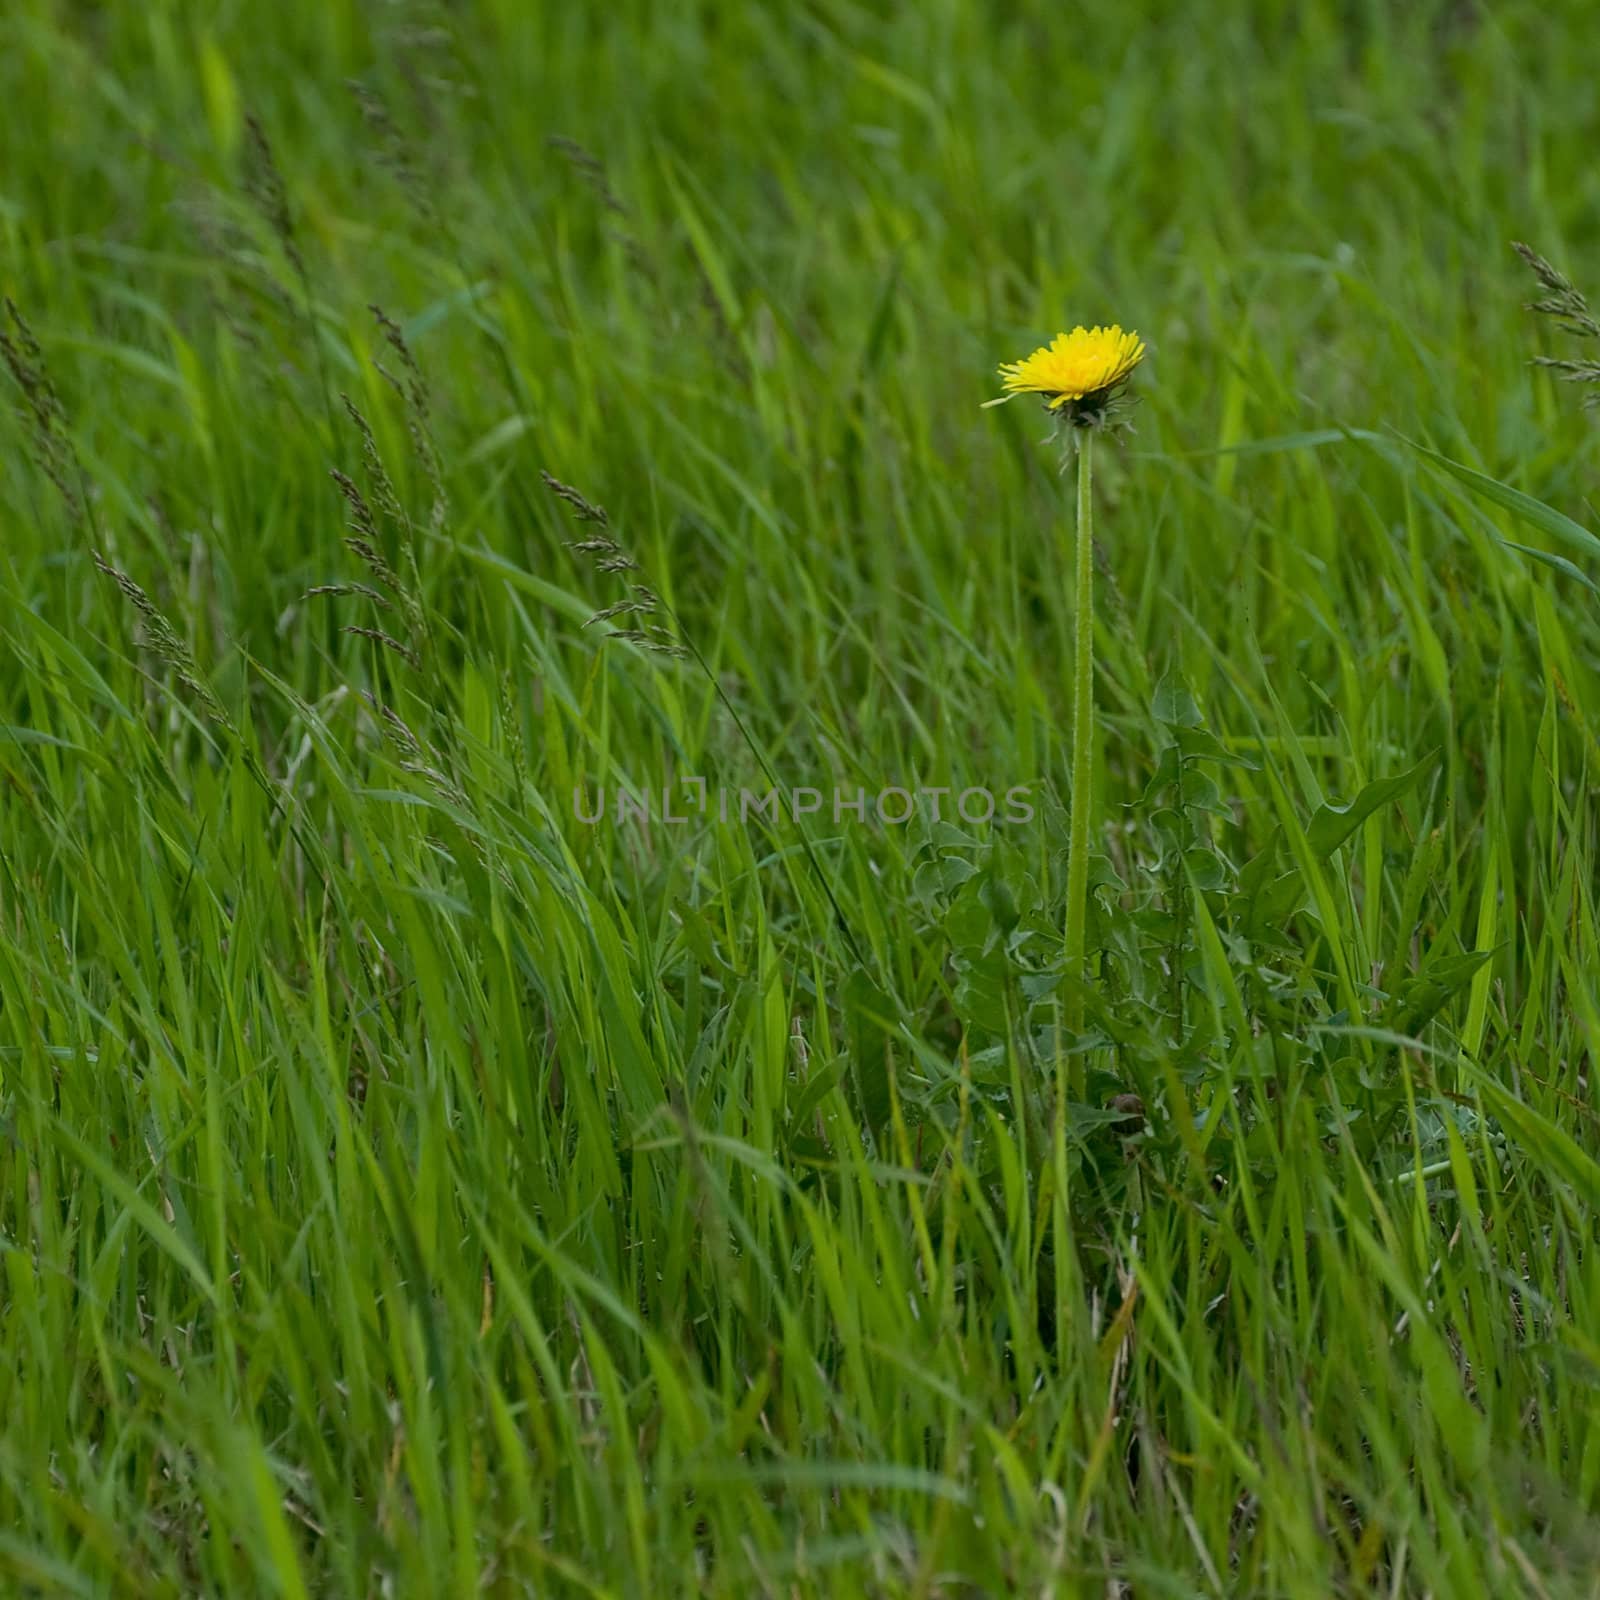 Green summer lawn with one yellow dandelion